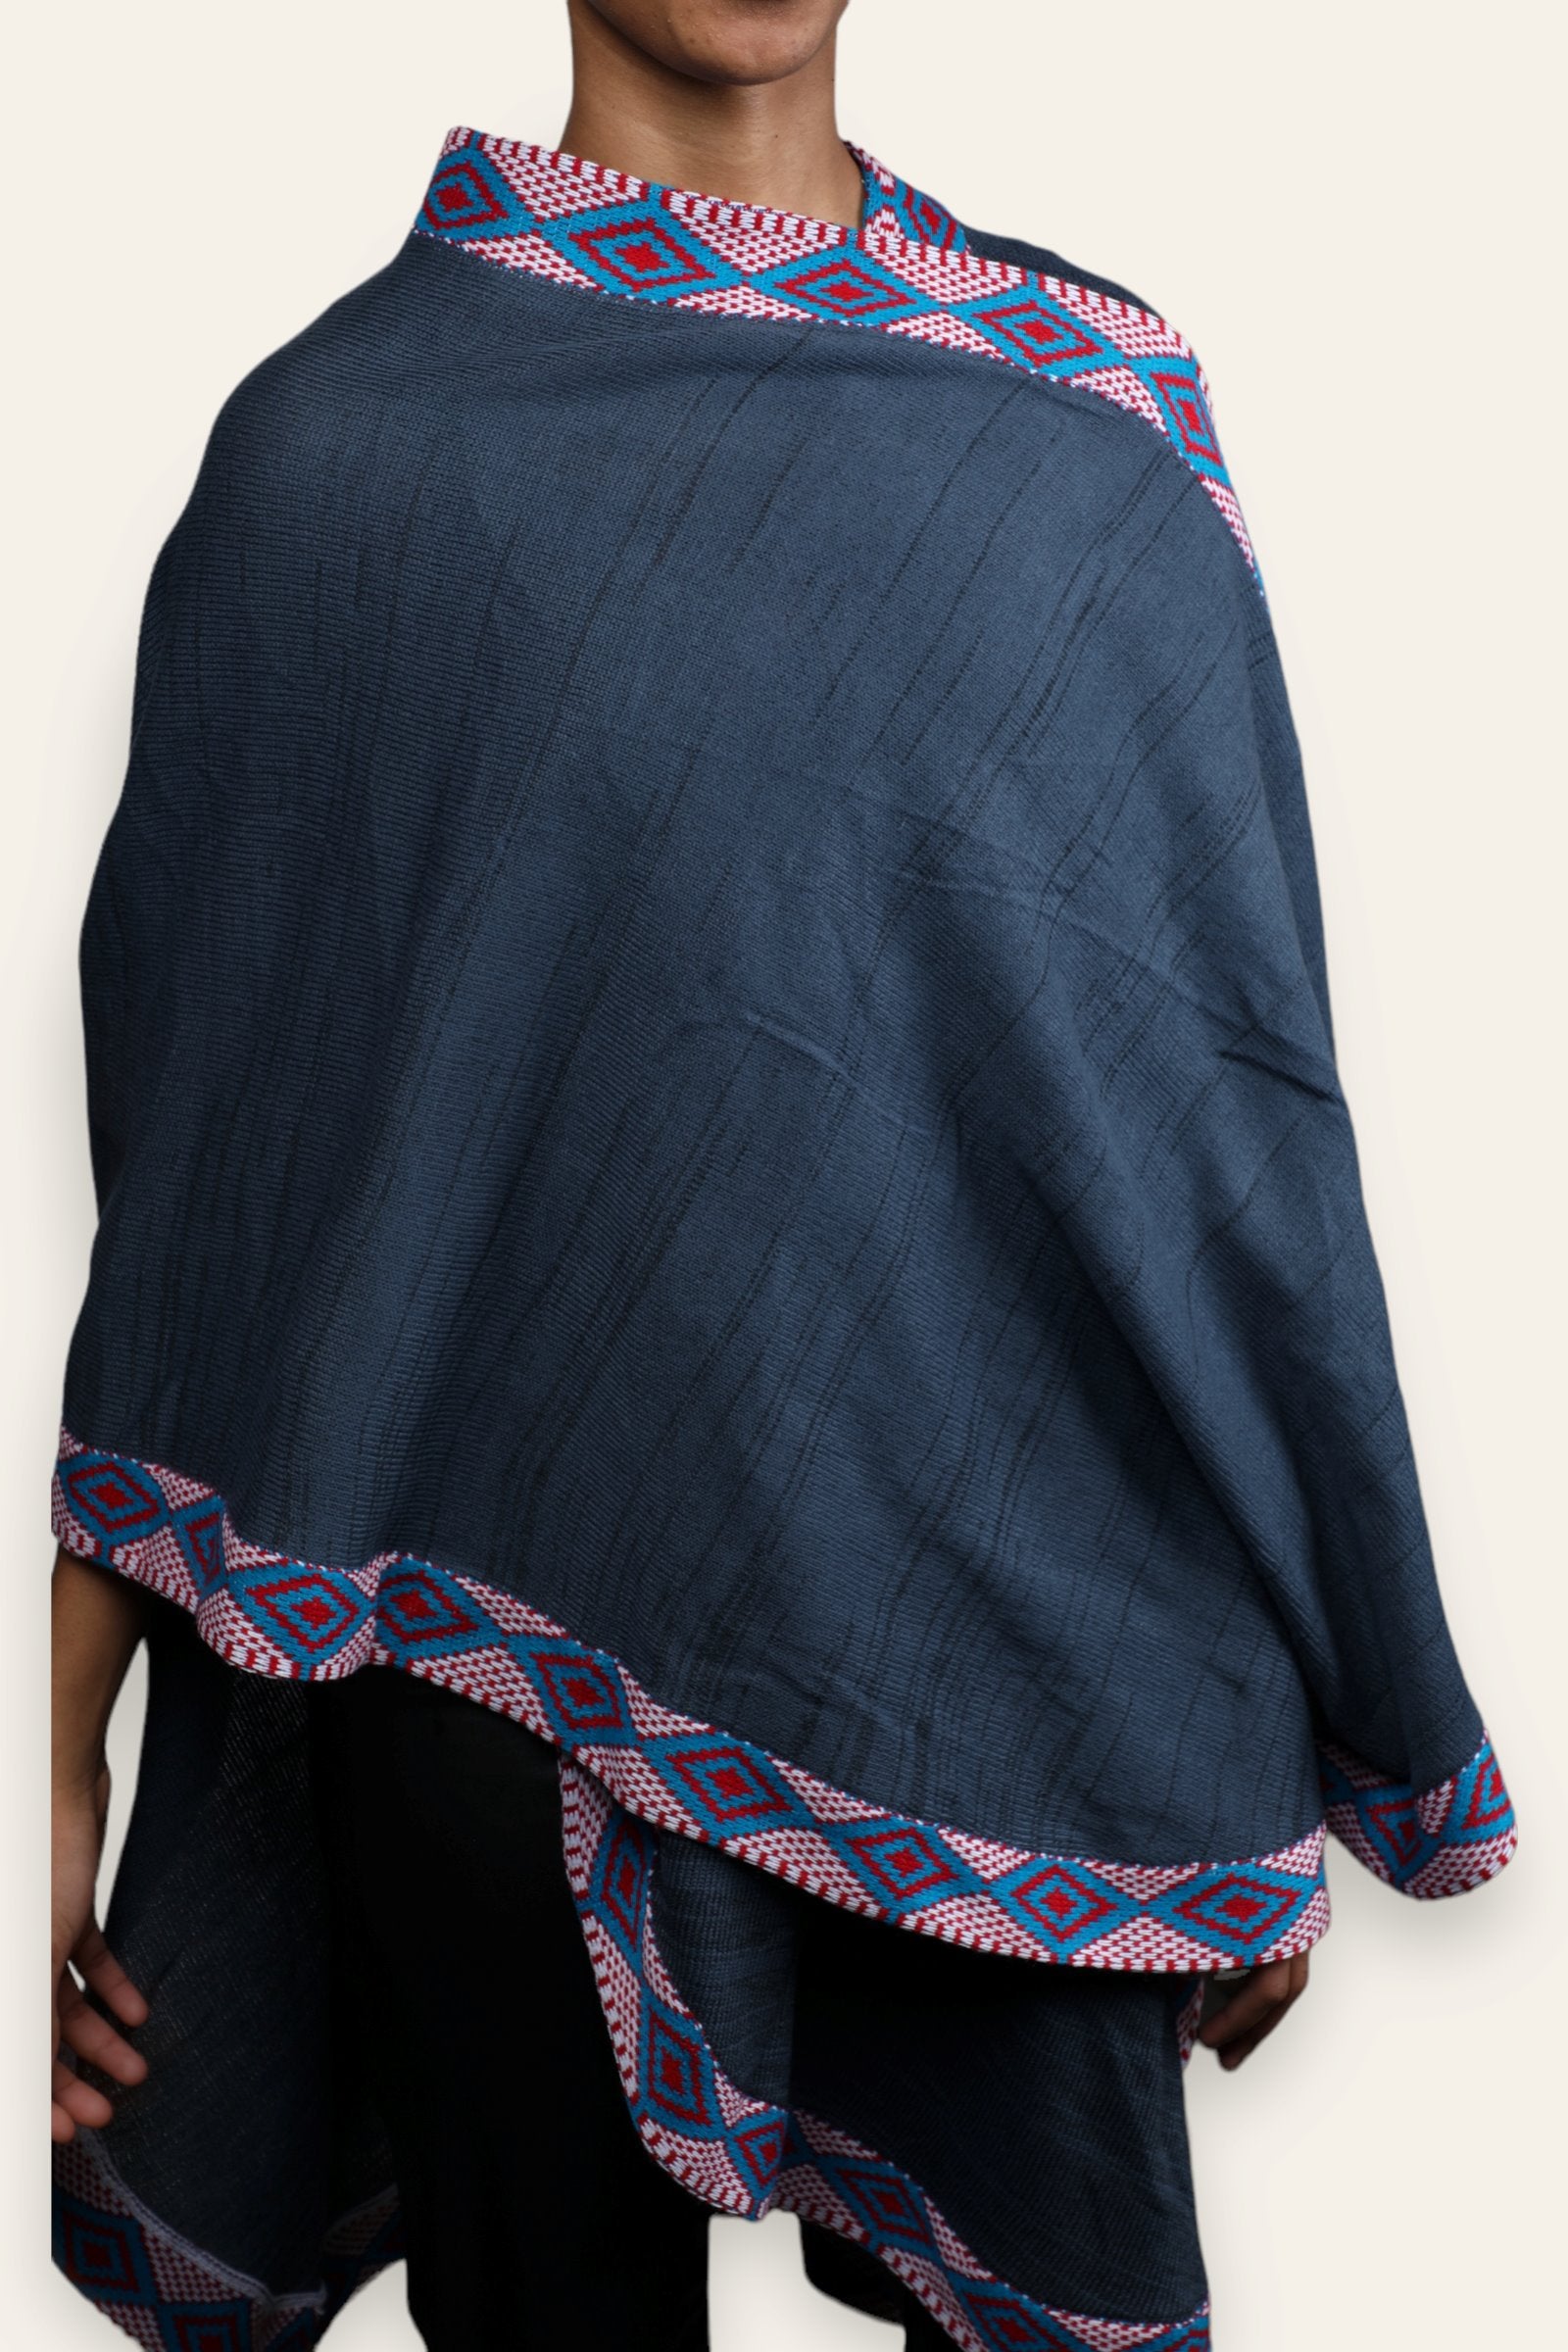 Handwoven Cardigan | Made in Ethiopia | Organic Cotton Cardigans Grmawit 